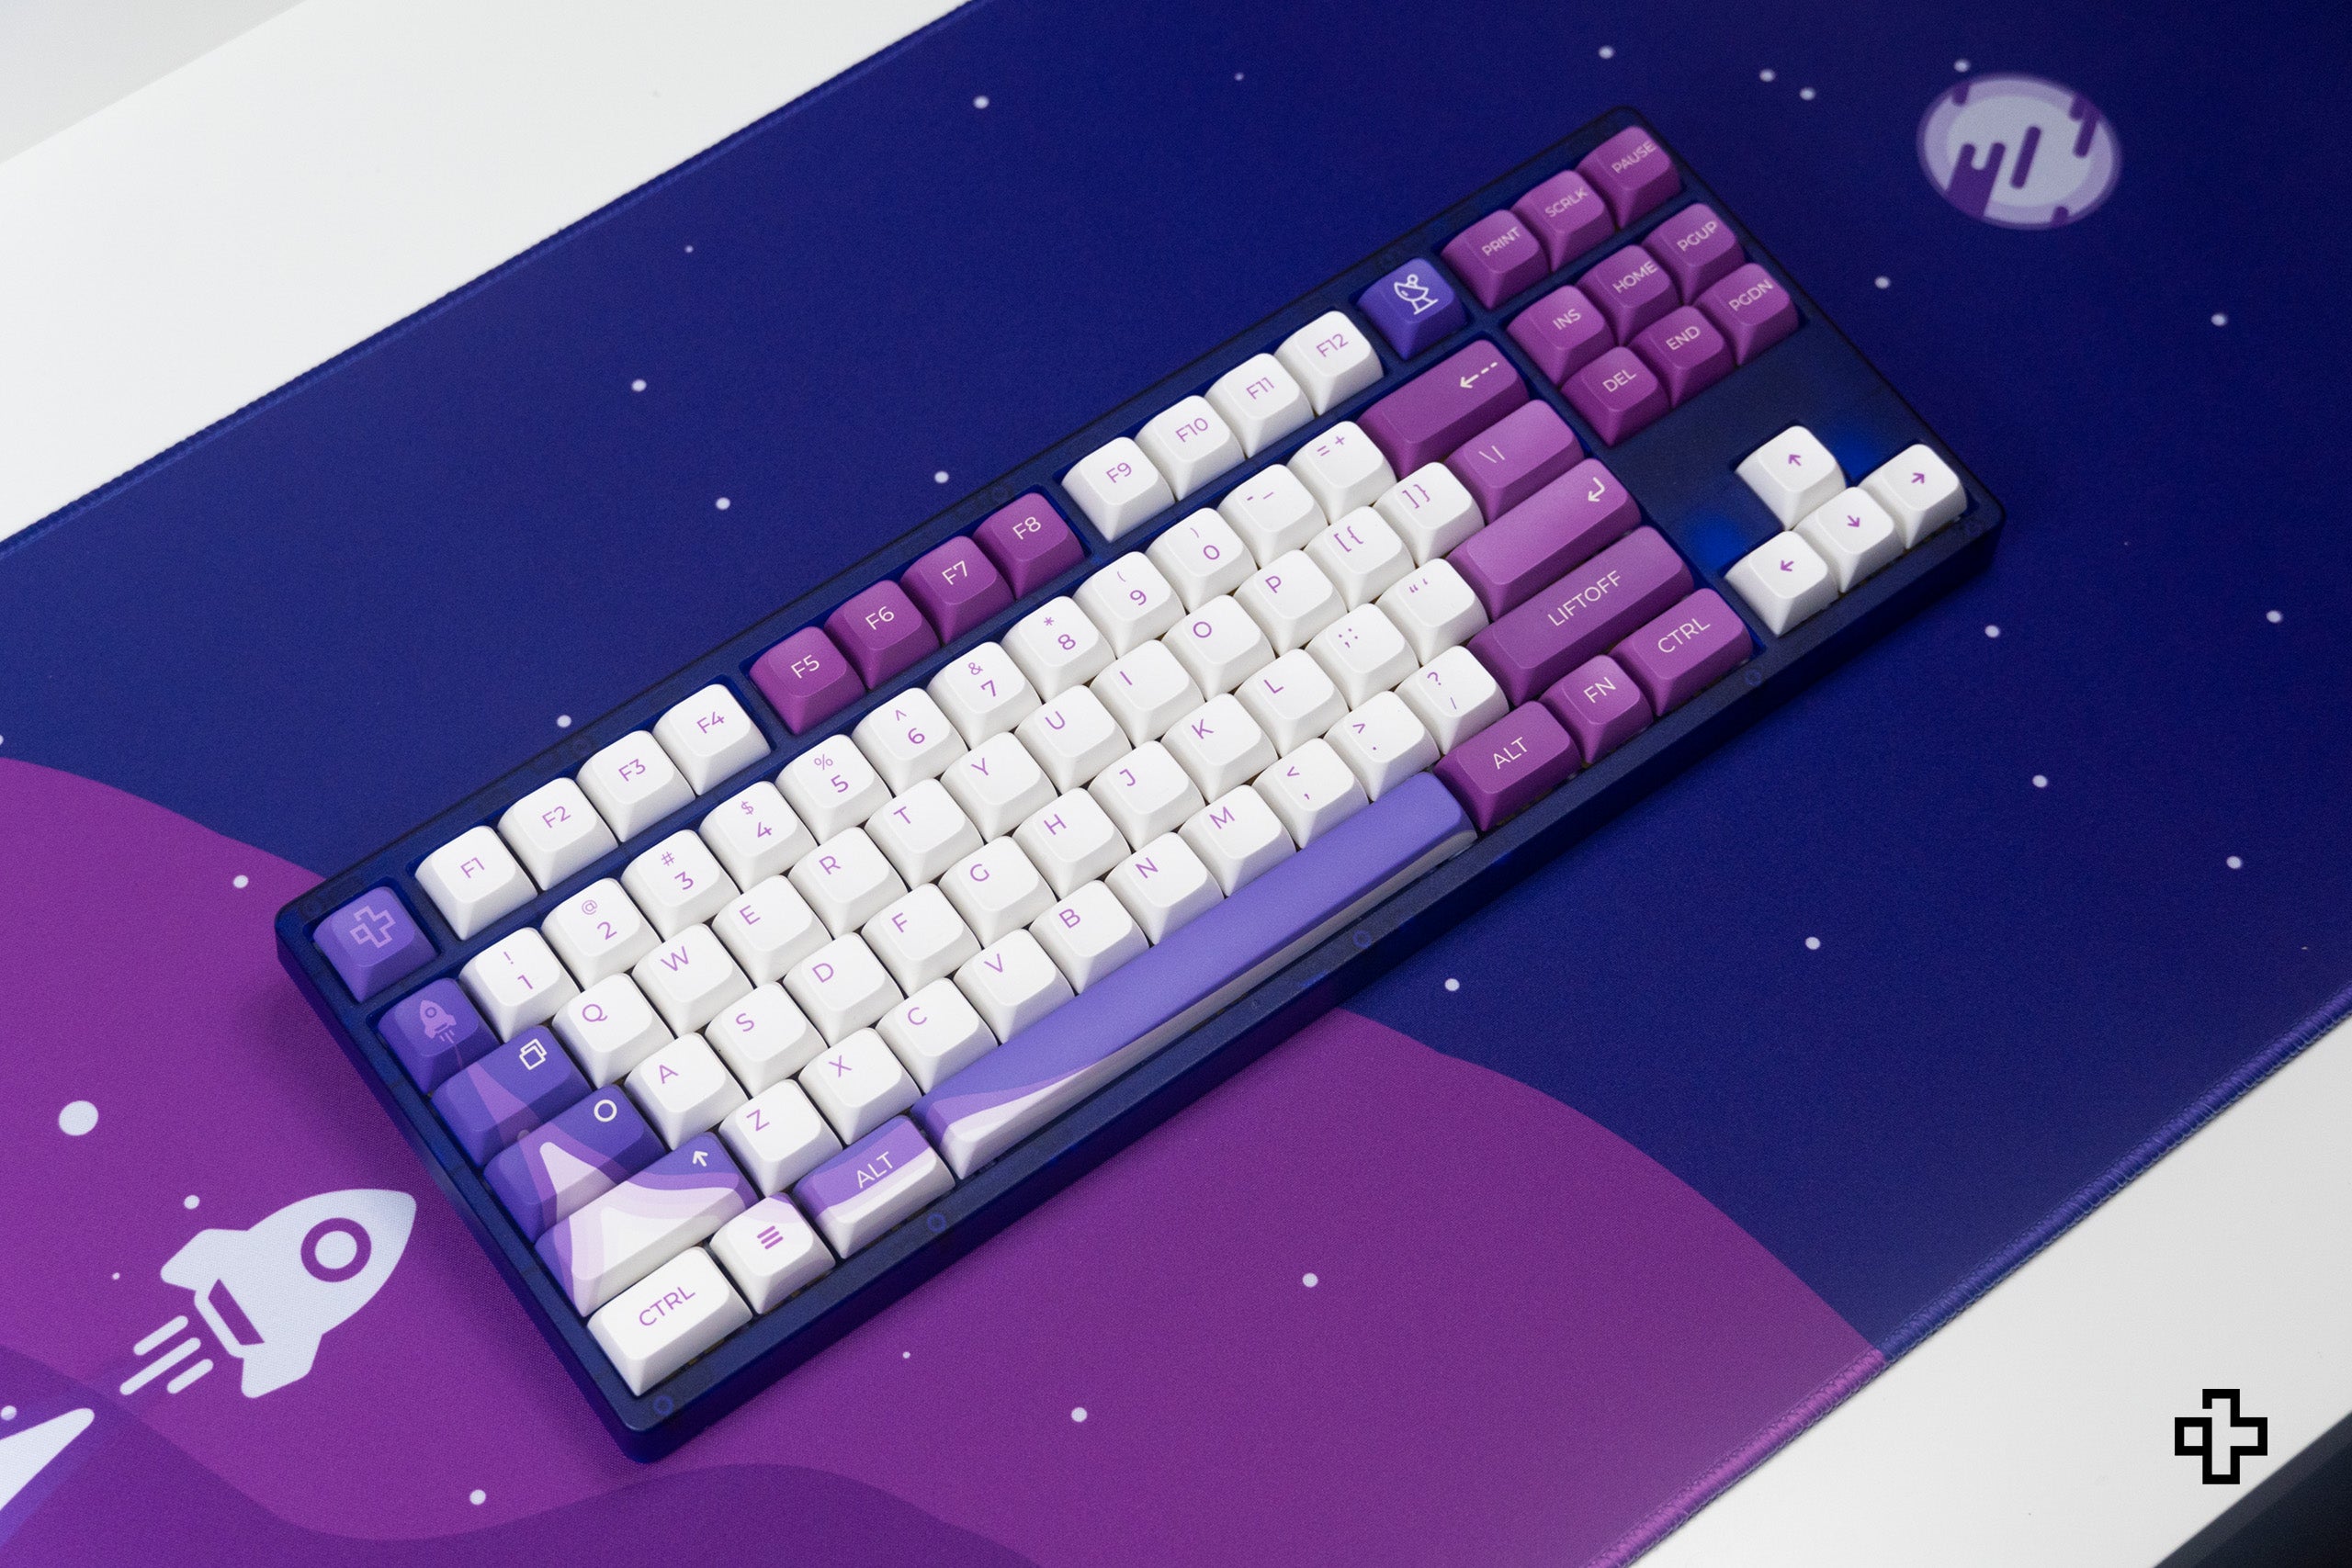 Imposta gusto QwertyKey LiftOff Profil XDA Materiale PBT